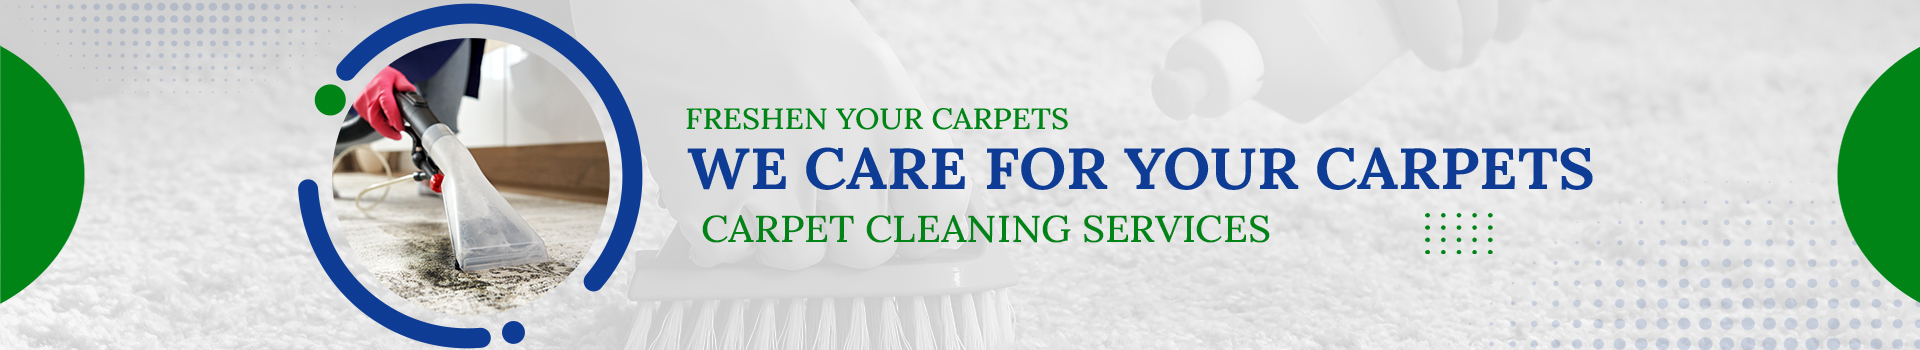 Carpet Cleaning Services 1